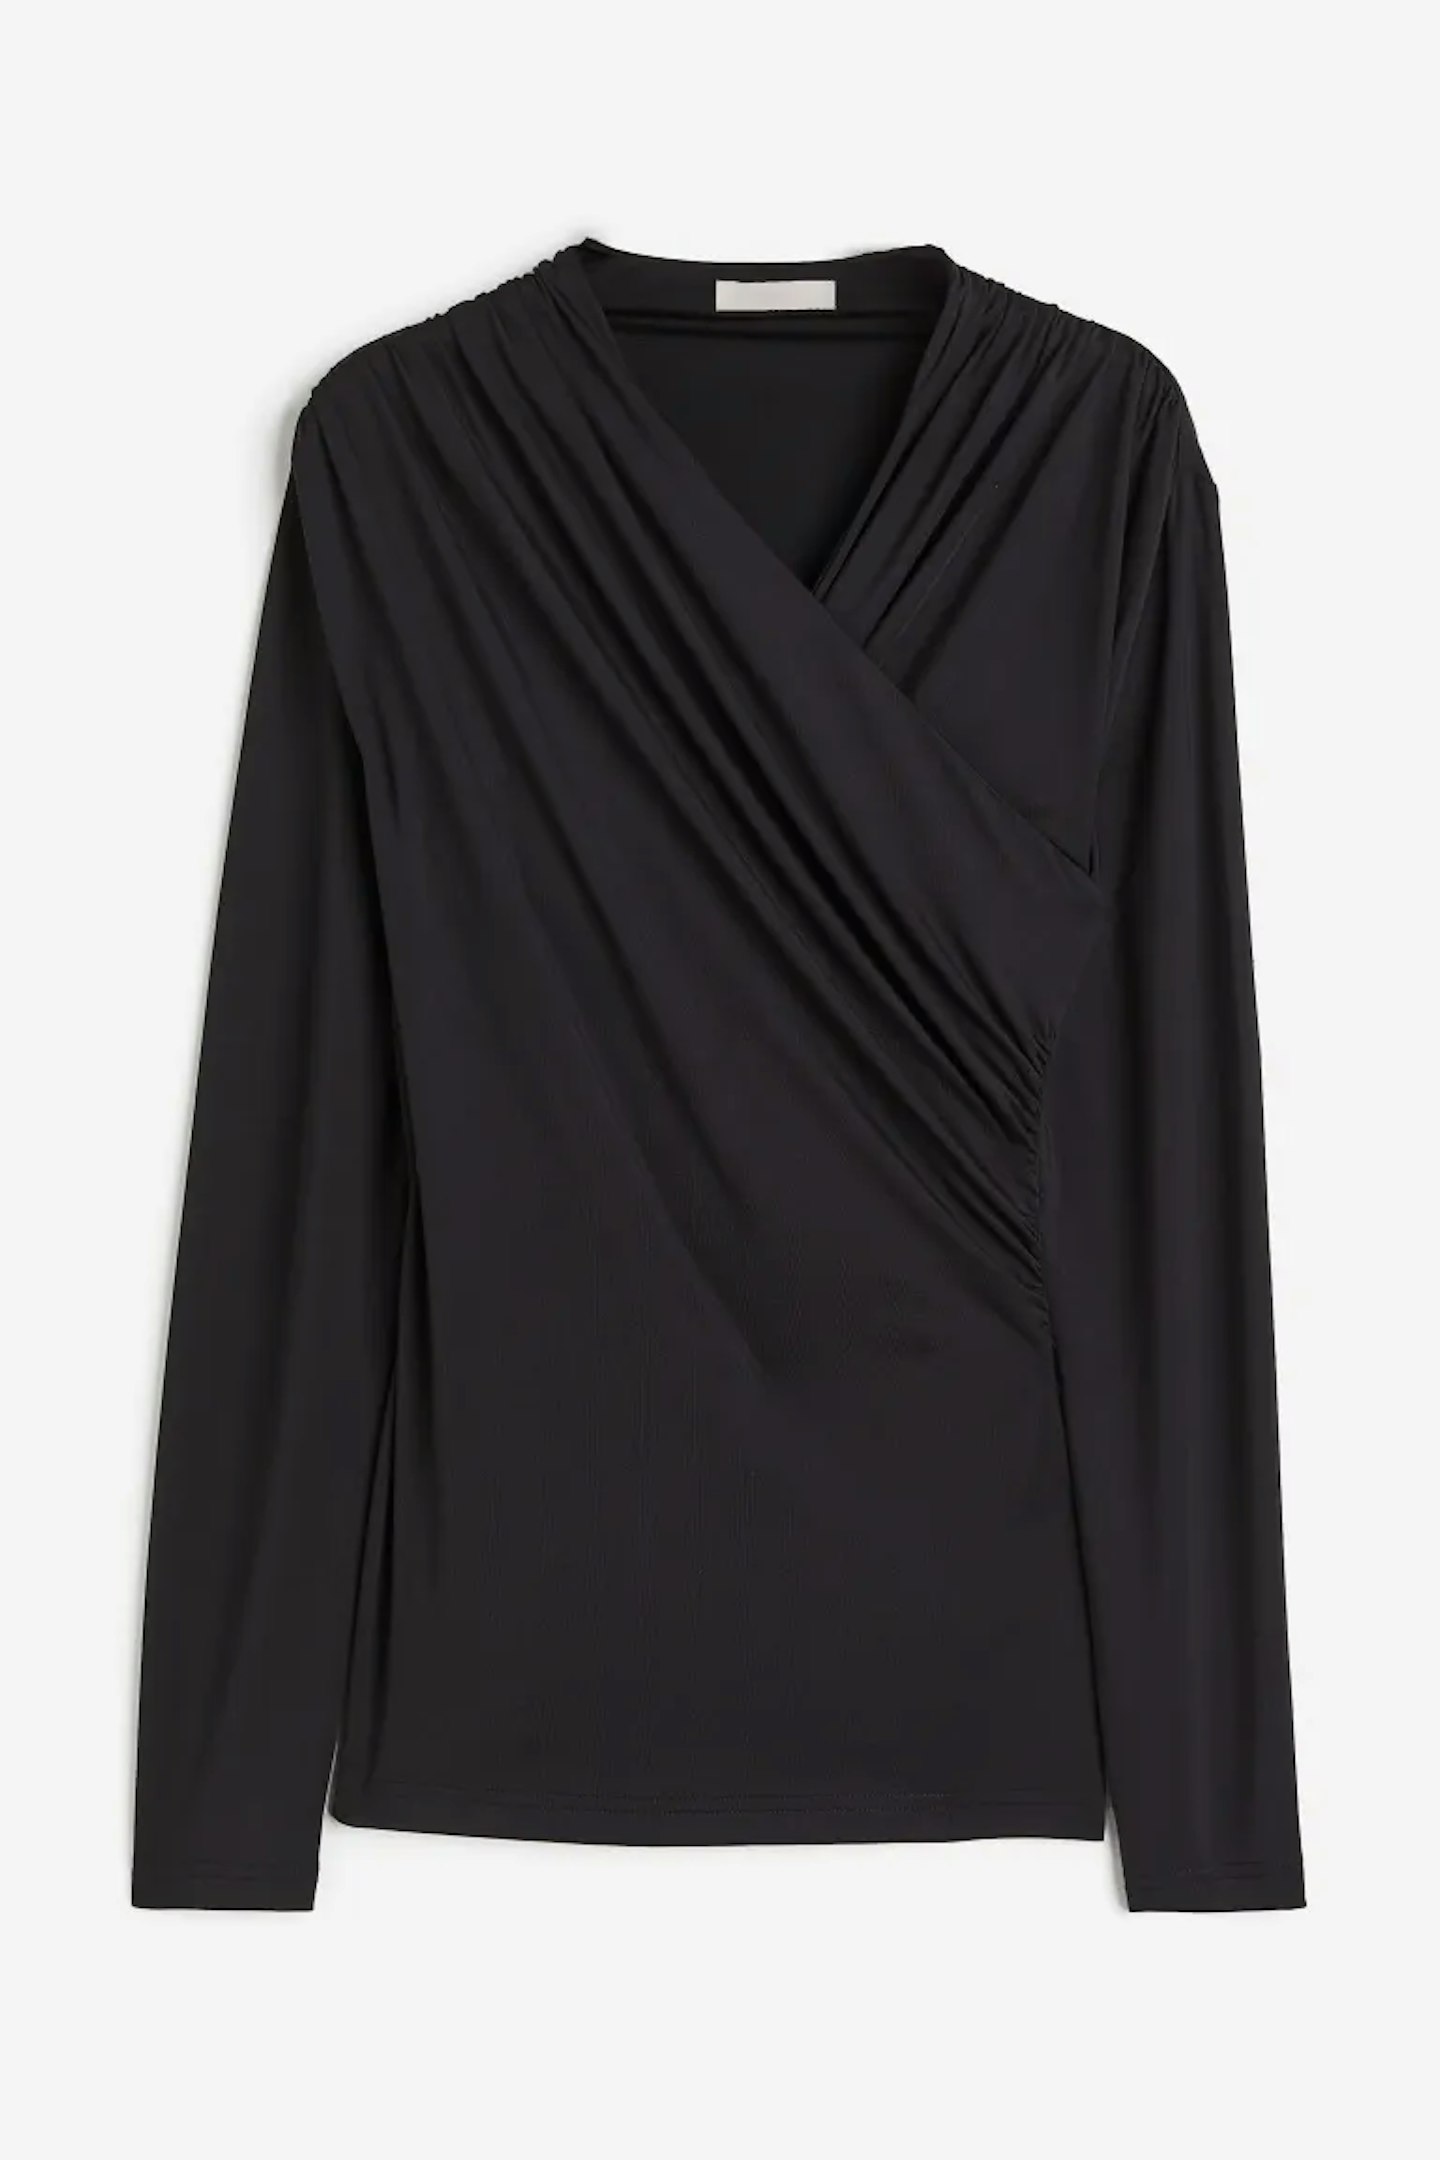 H&M's £12.99 Jersey Wrap Top Is The Answer To A Chic Autumn